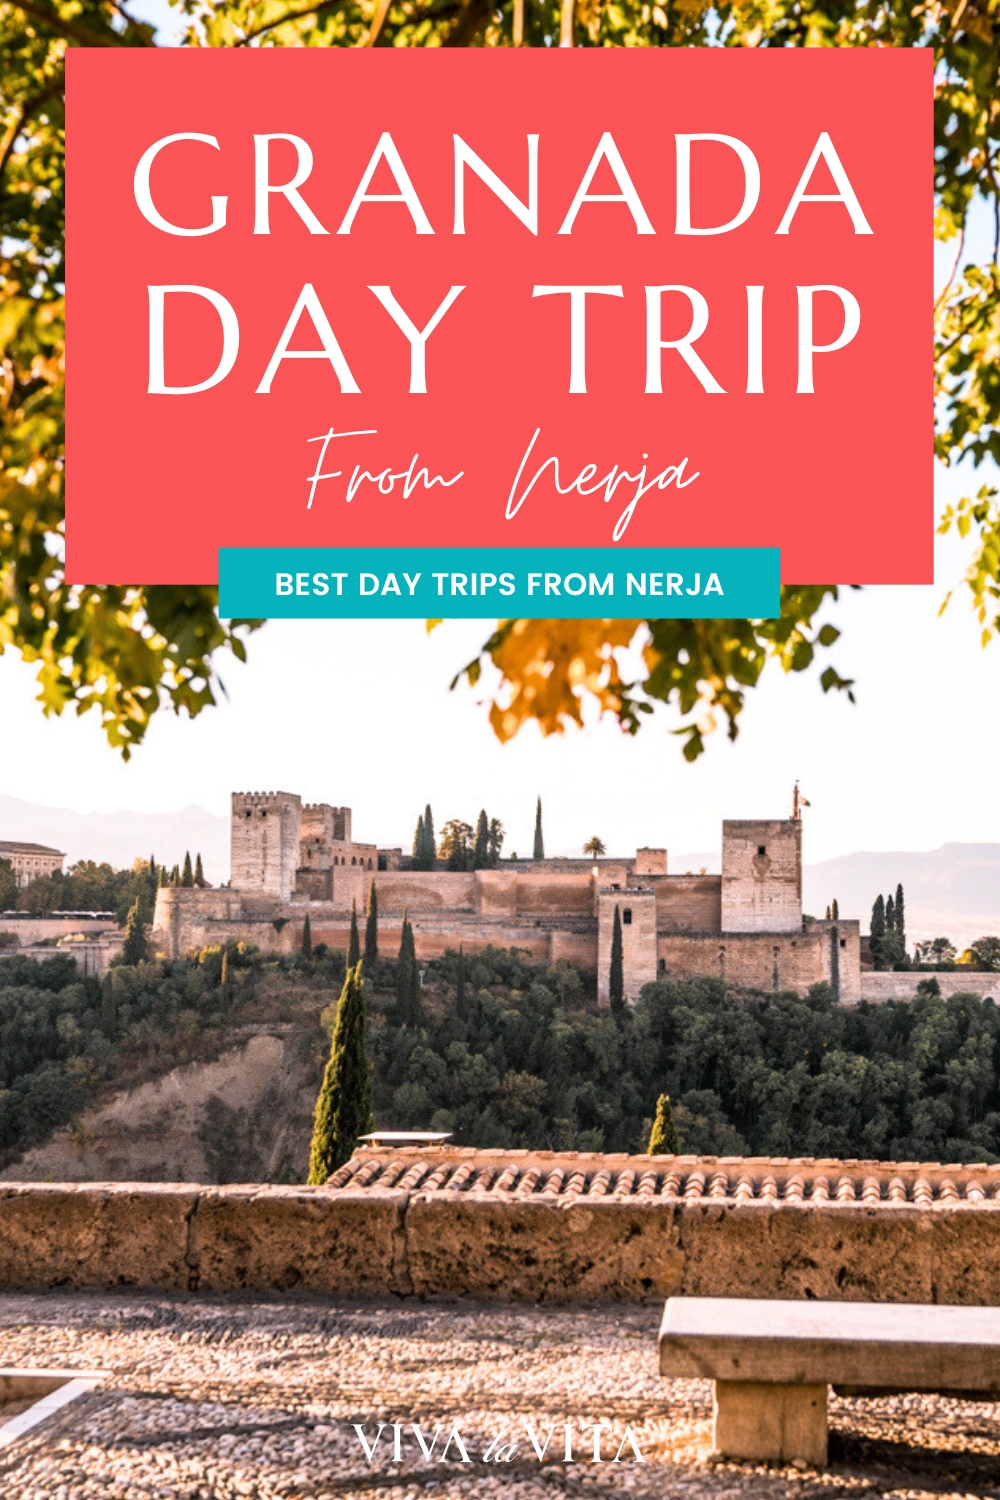 Pinterest image showing the Alhambra view from Mirador St Nicolas, with a headline - Granada day trip from Nerja, Best Day Trips from Nerja